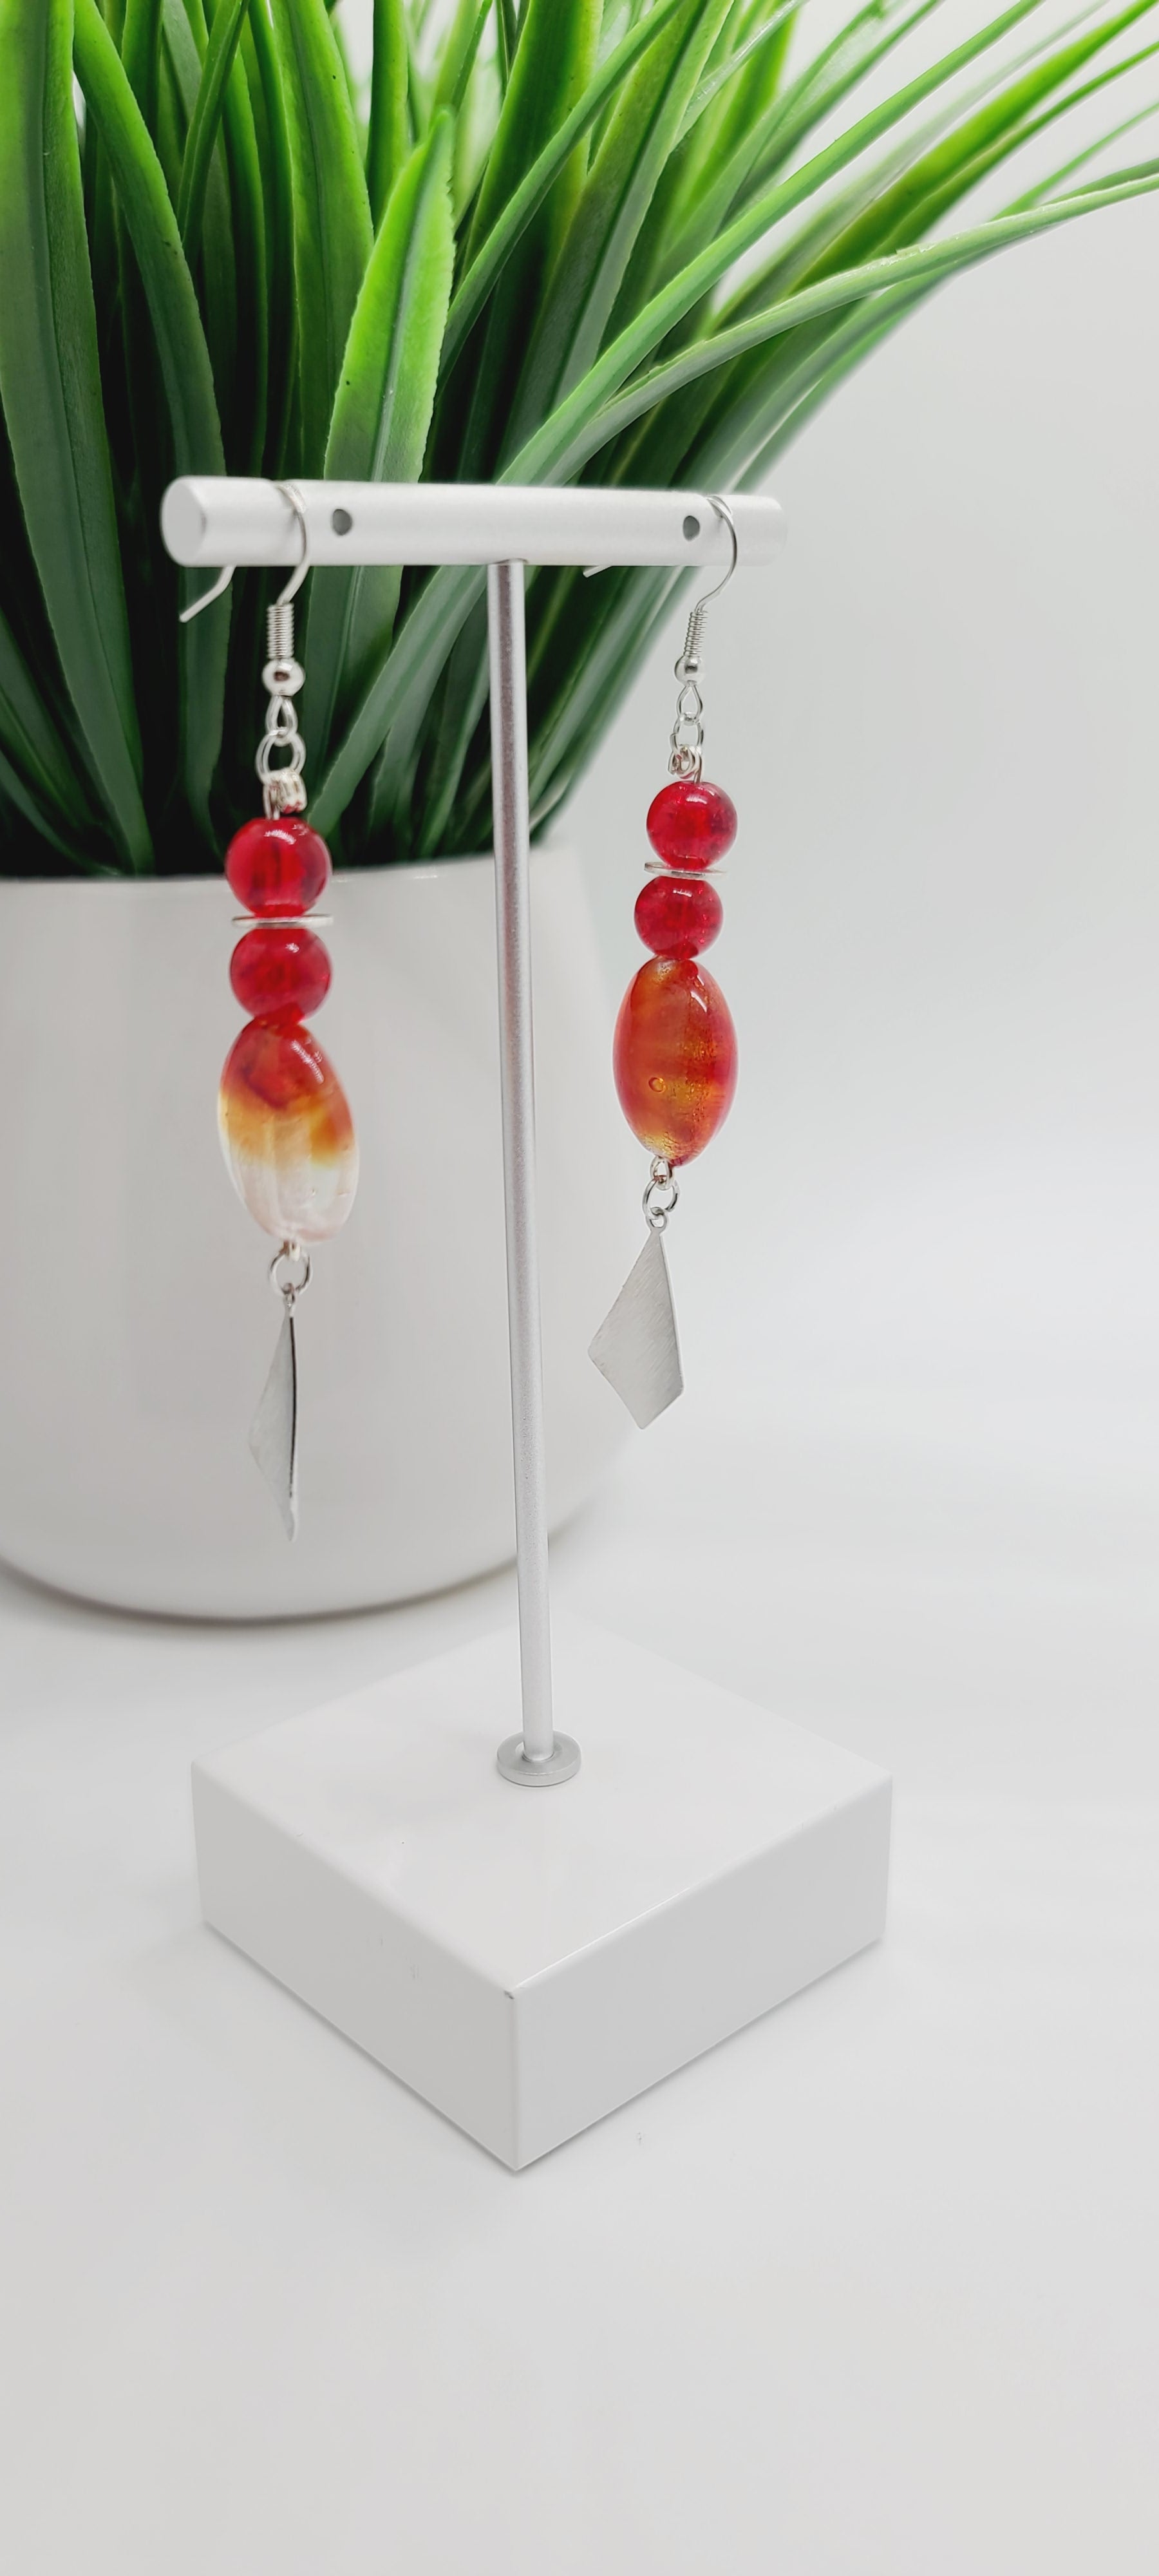 Length: 3 inches | Weight: 0.6 ounces  Distinctly You! These earrings are made with red and silver swirl Italian Murano glass stones, 8mm red glass beads, accented with silver rondelles and charms.